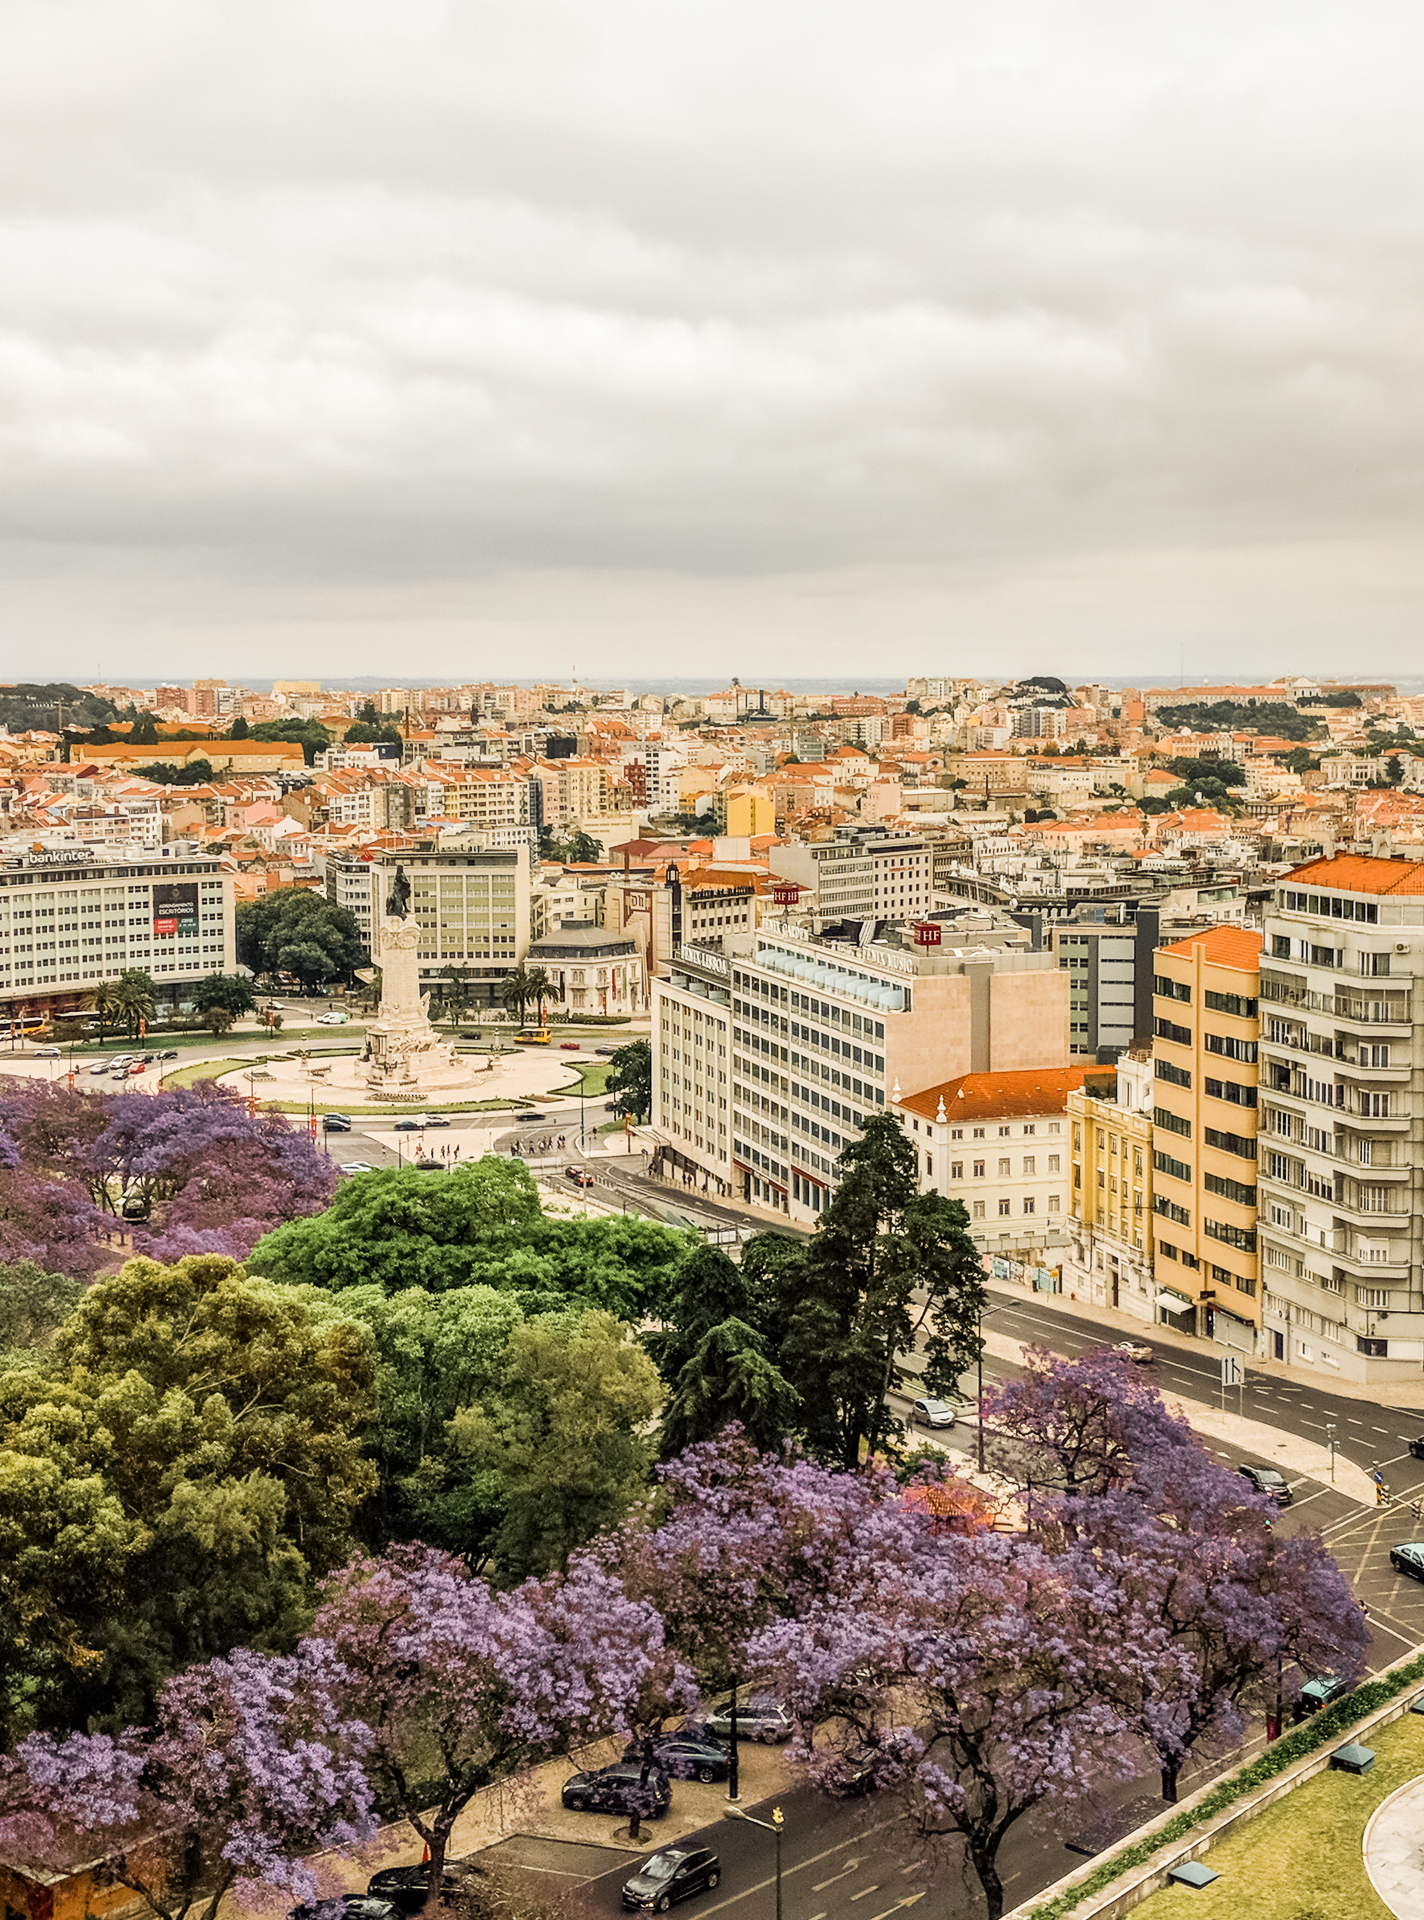 Four Seaons Review: Experience Luxury at the Four Seasons Lisbon featured by popular Boston travel blogger, The Hunter Collector